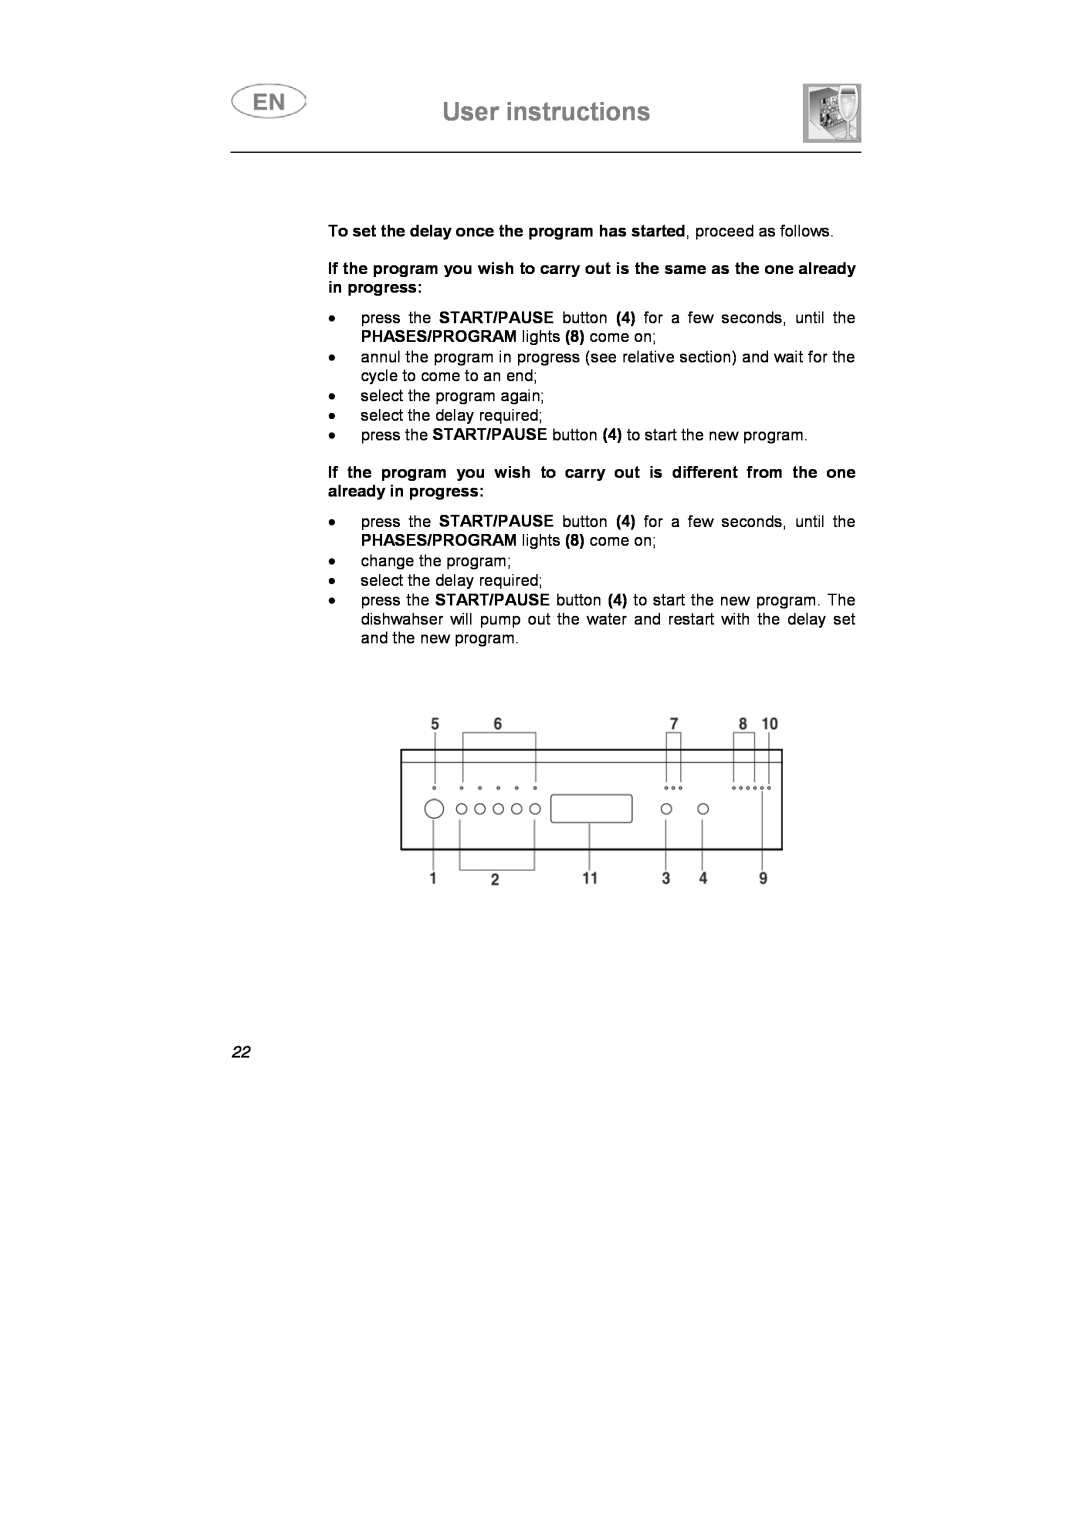 Smeg LS4647XH7 instruction manual User instructions, To set the delay once the program has started, proceed as follows 